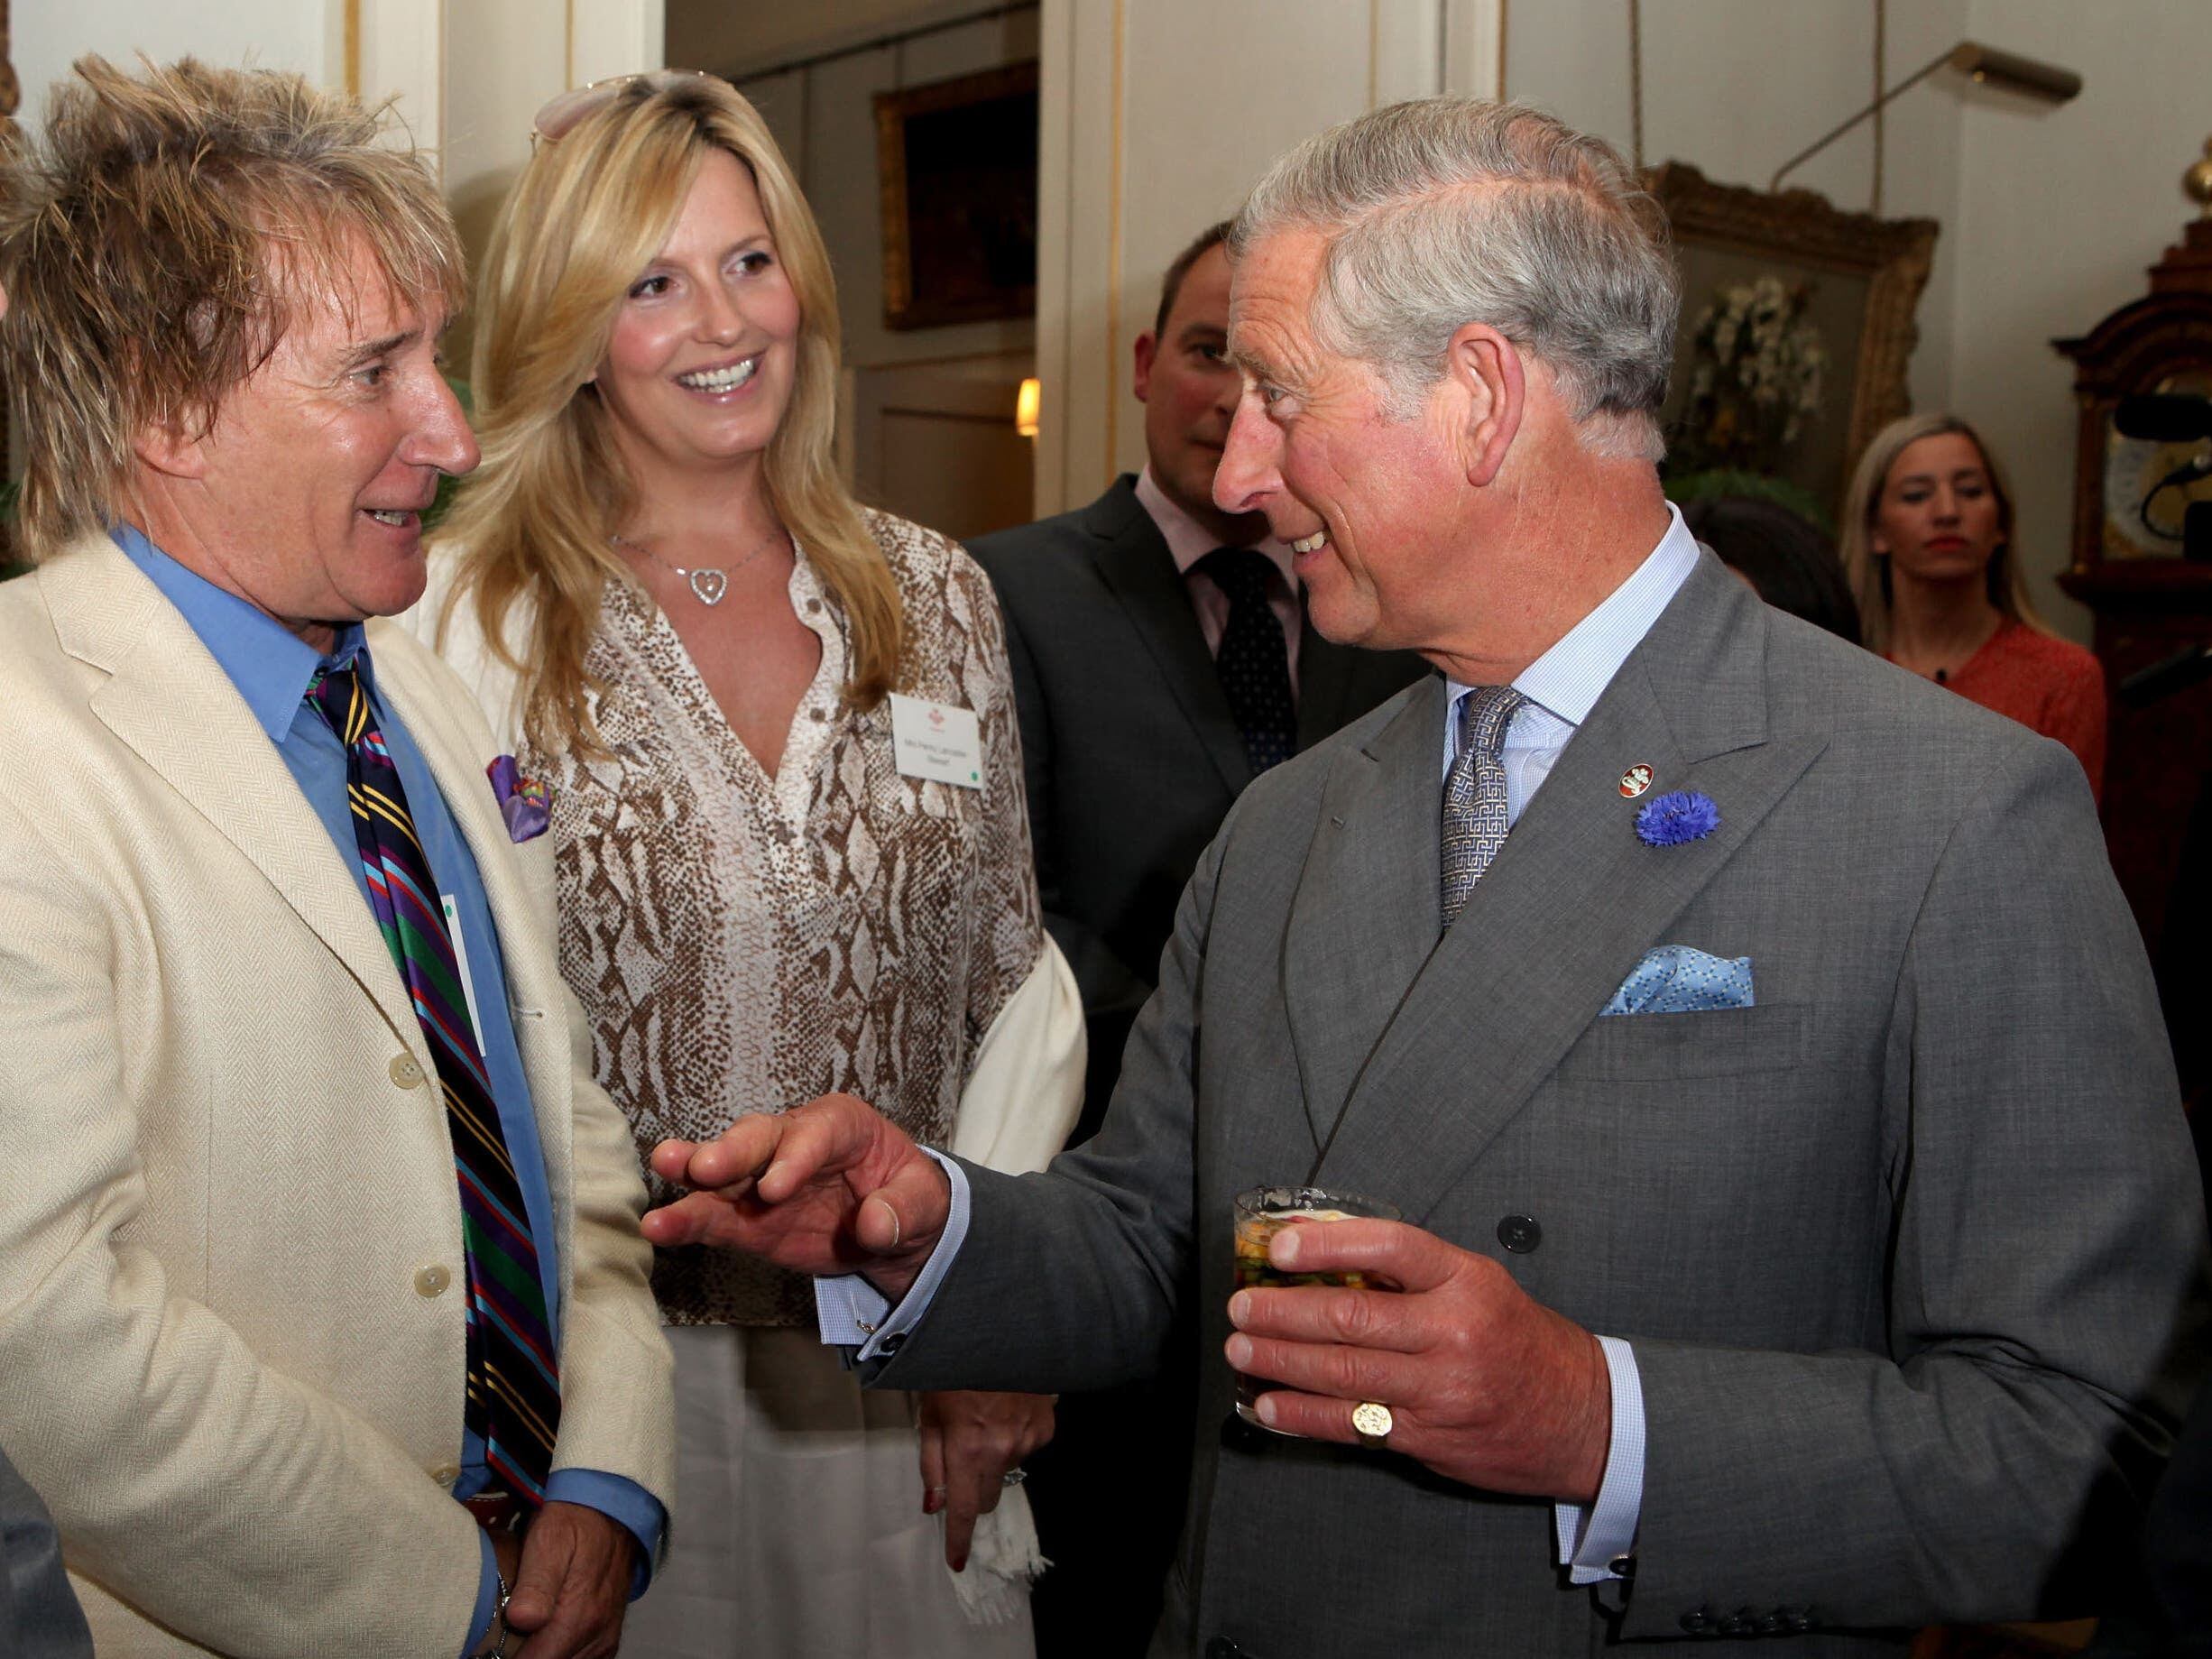 Penny Lancaster recalls memories of dancing with the King on his 60th birthday